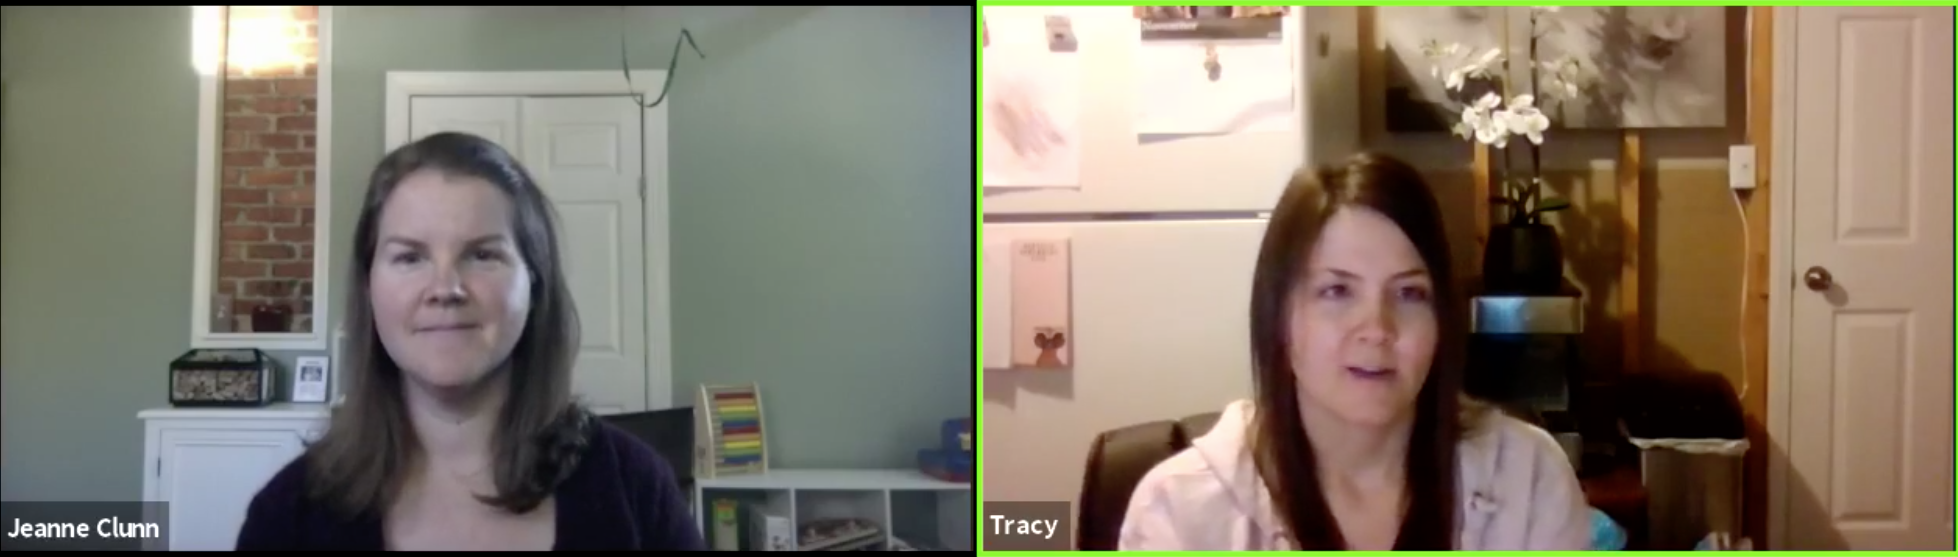 Screenshot of Client Interview with Tracy